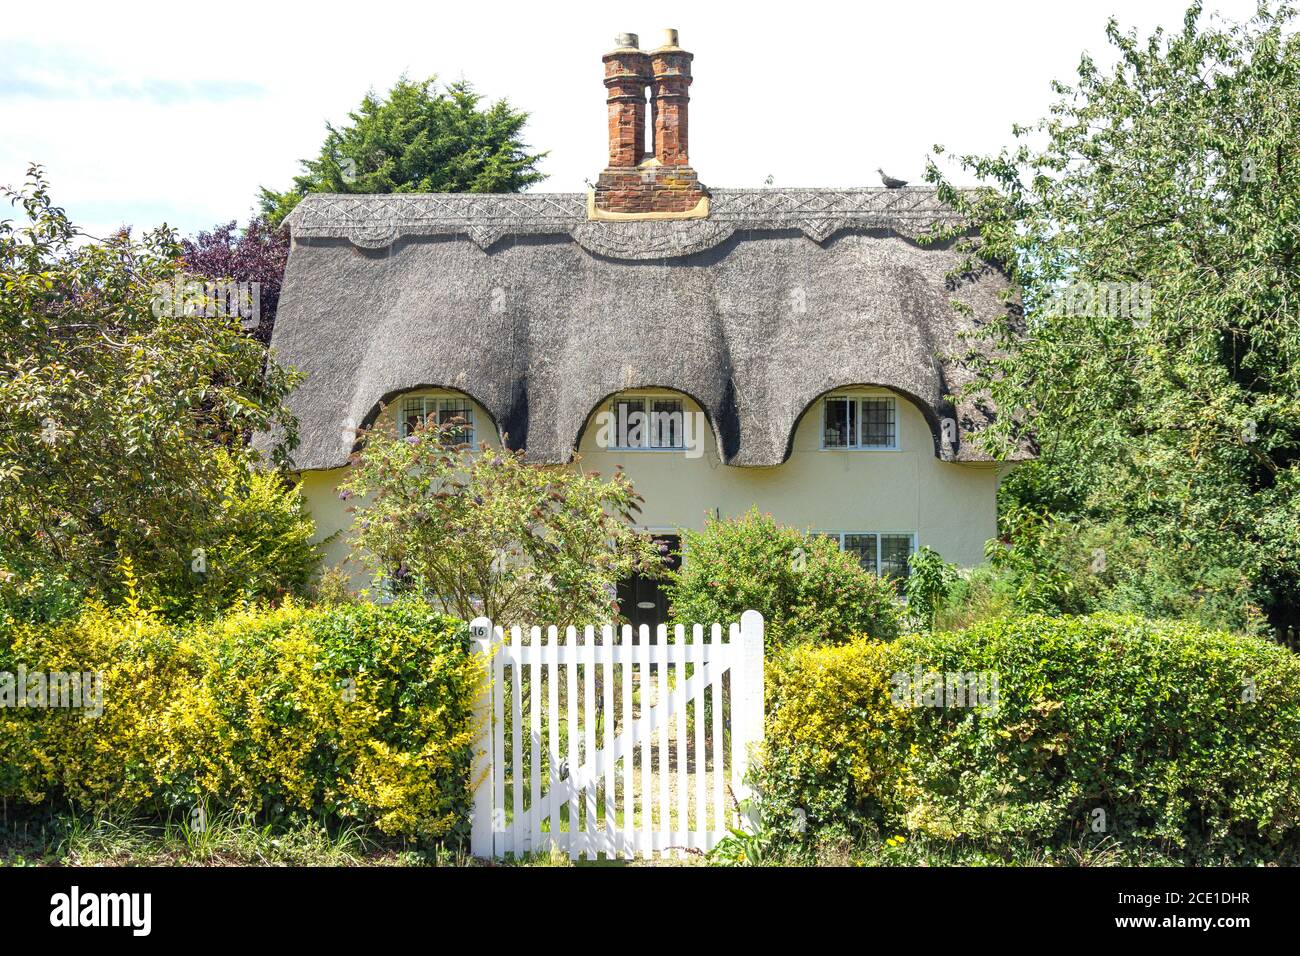 Thatched cottage and garden, The Village, Old Warden, Bedfordshire, England, United Kingdom Stock Photo